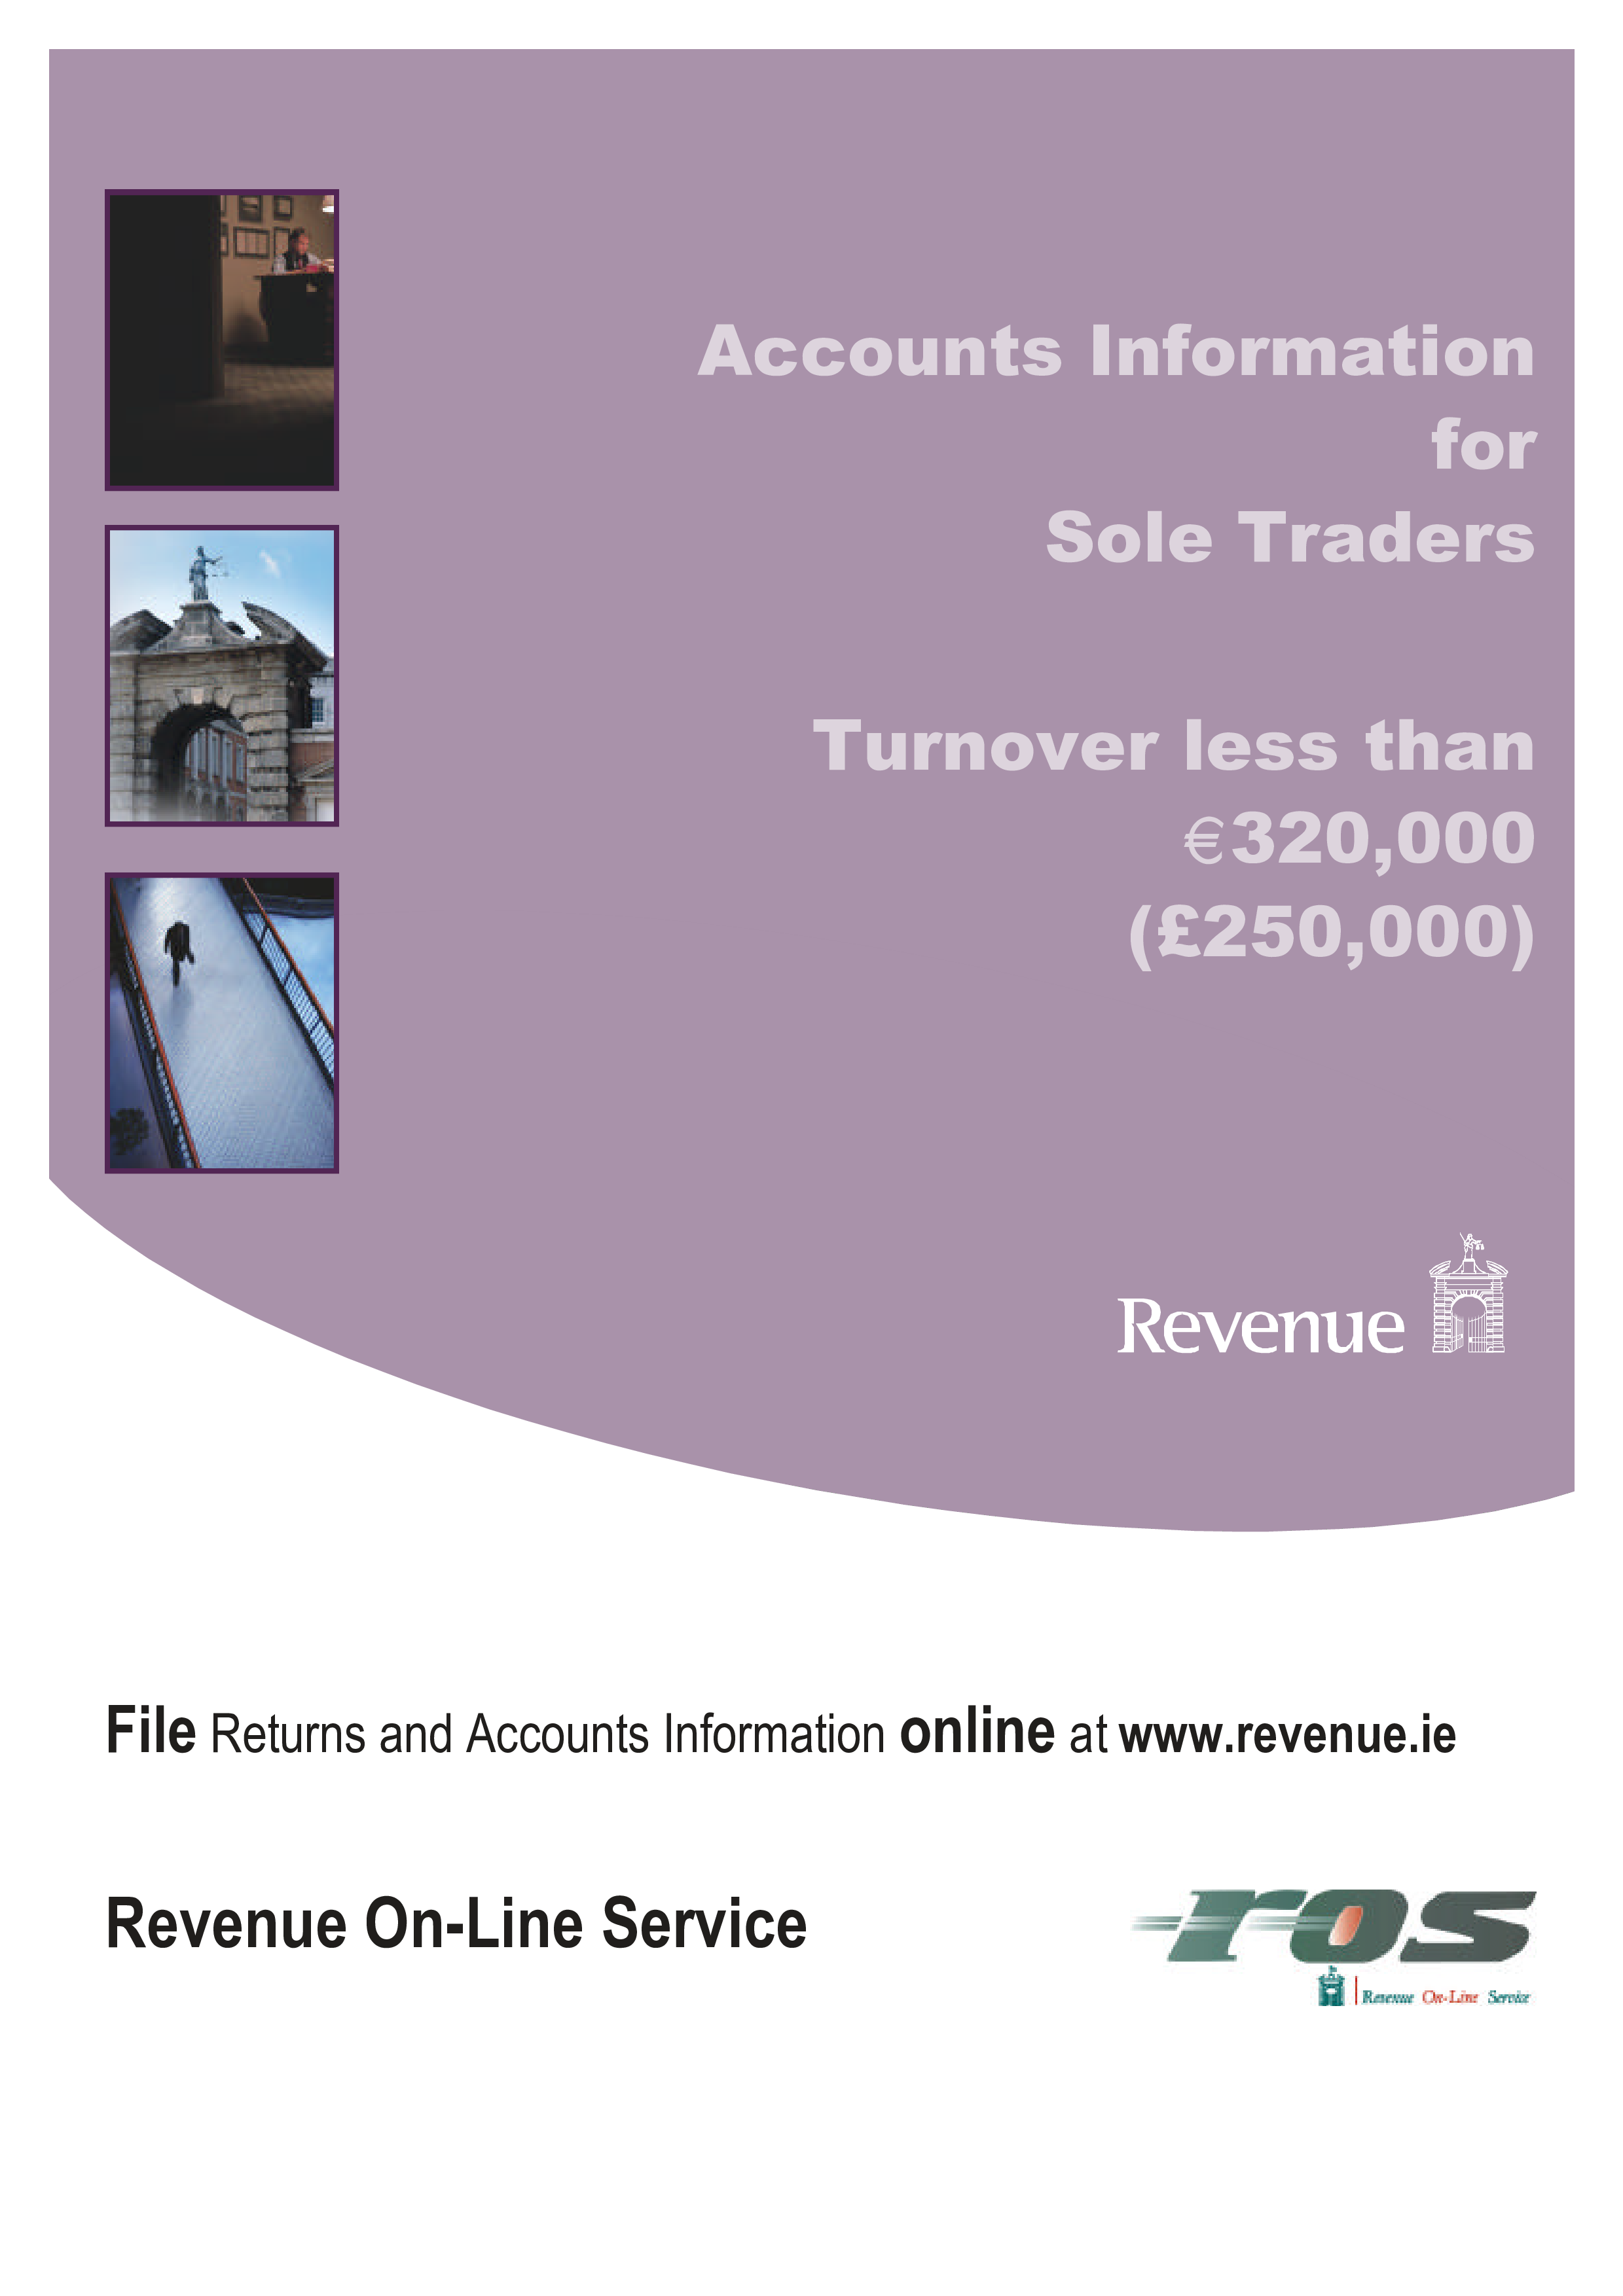 stam 1 - accounts information for sole traders turnover less than £320,000 (£250,000) modèles